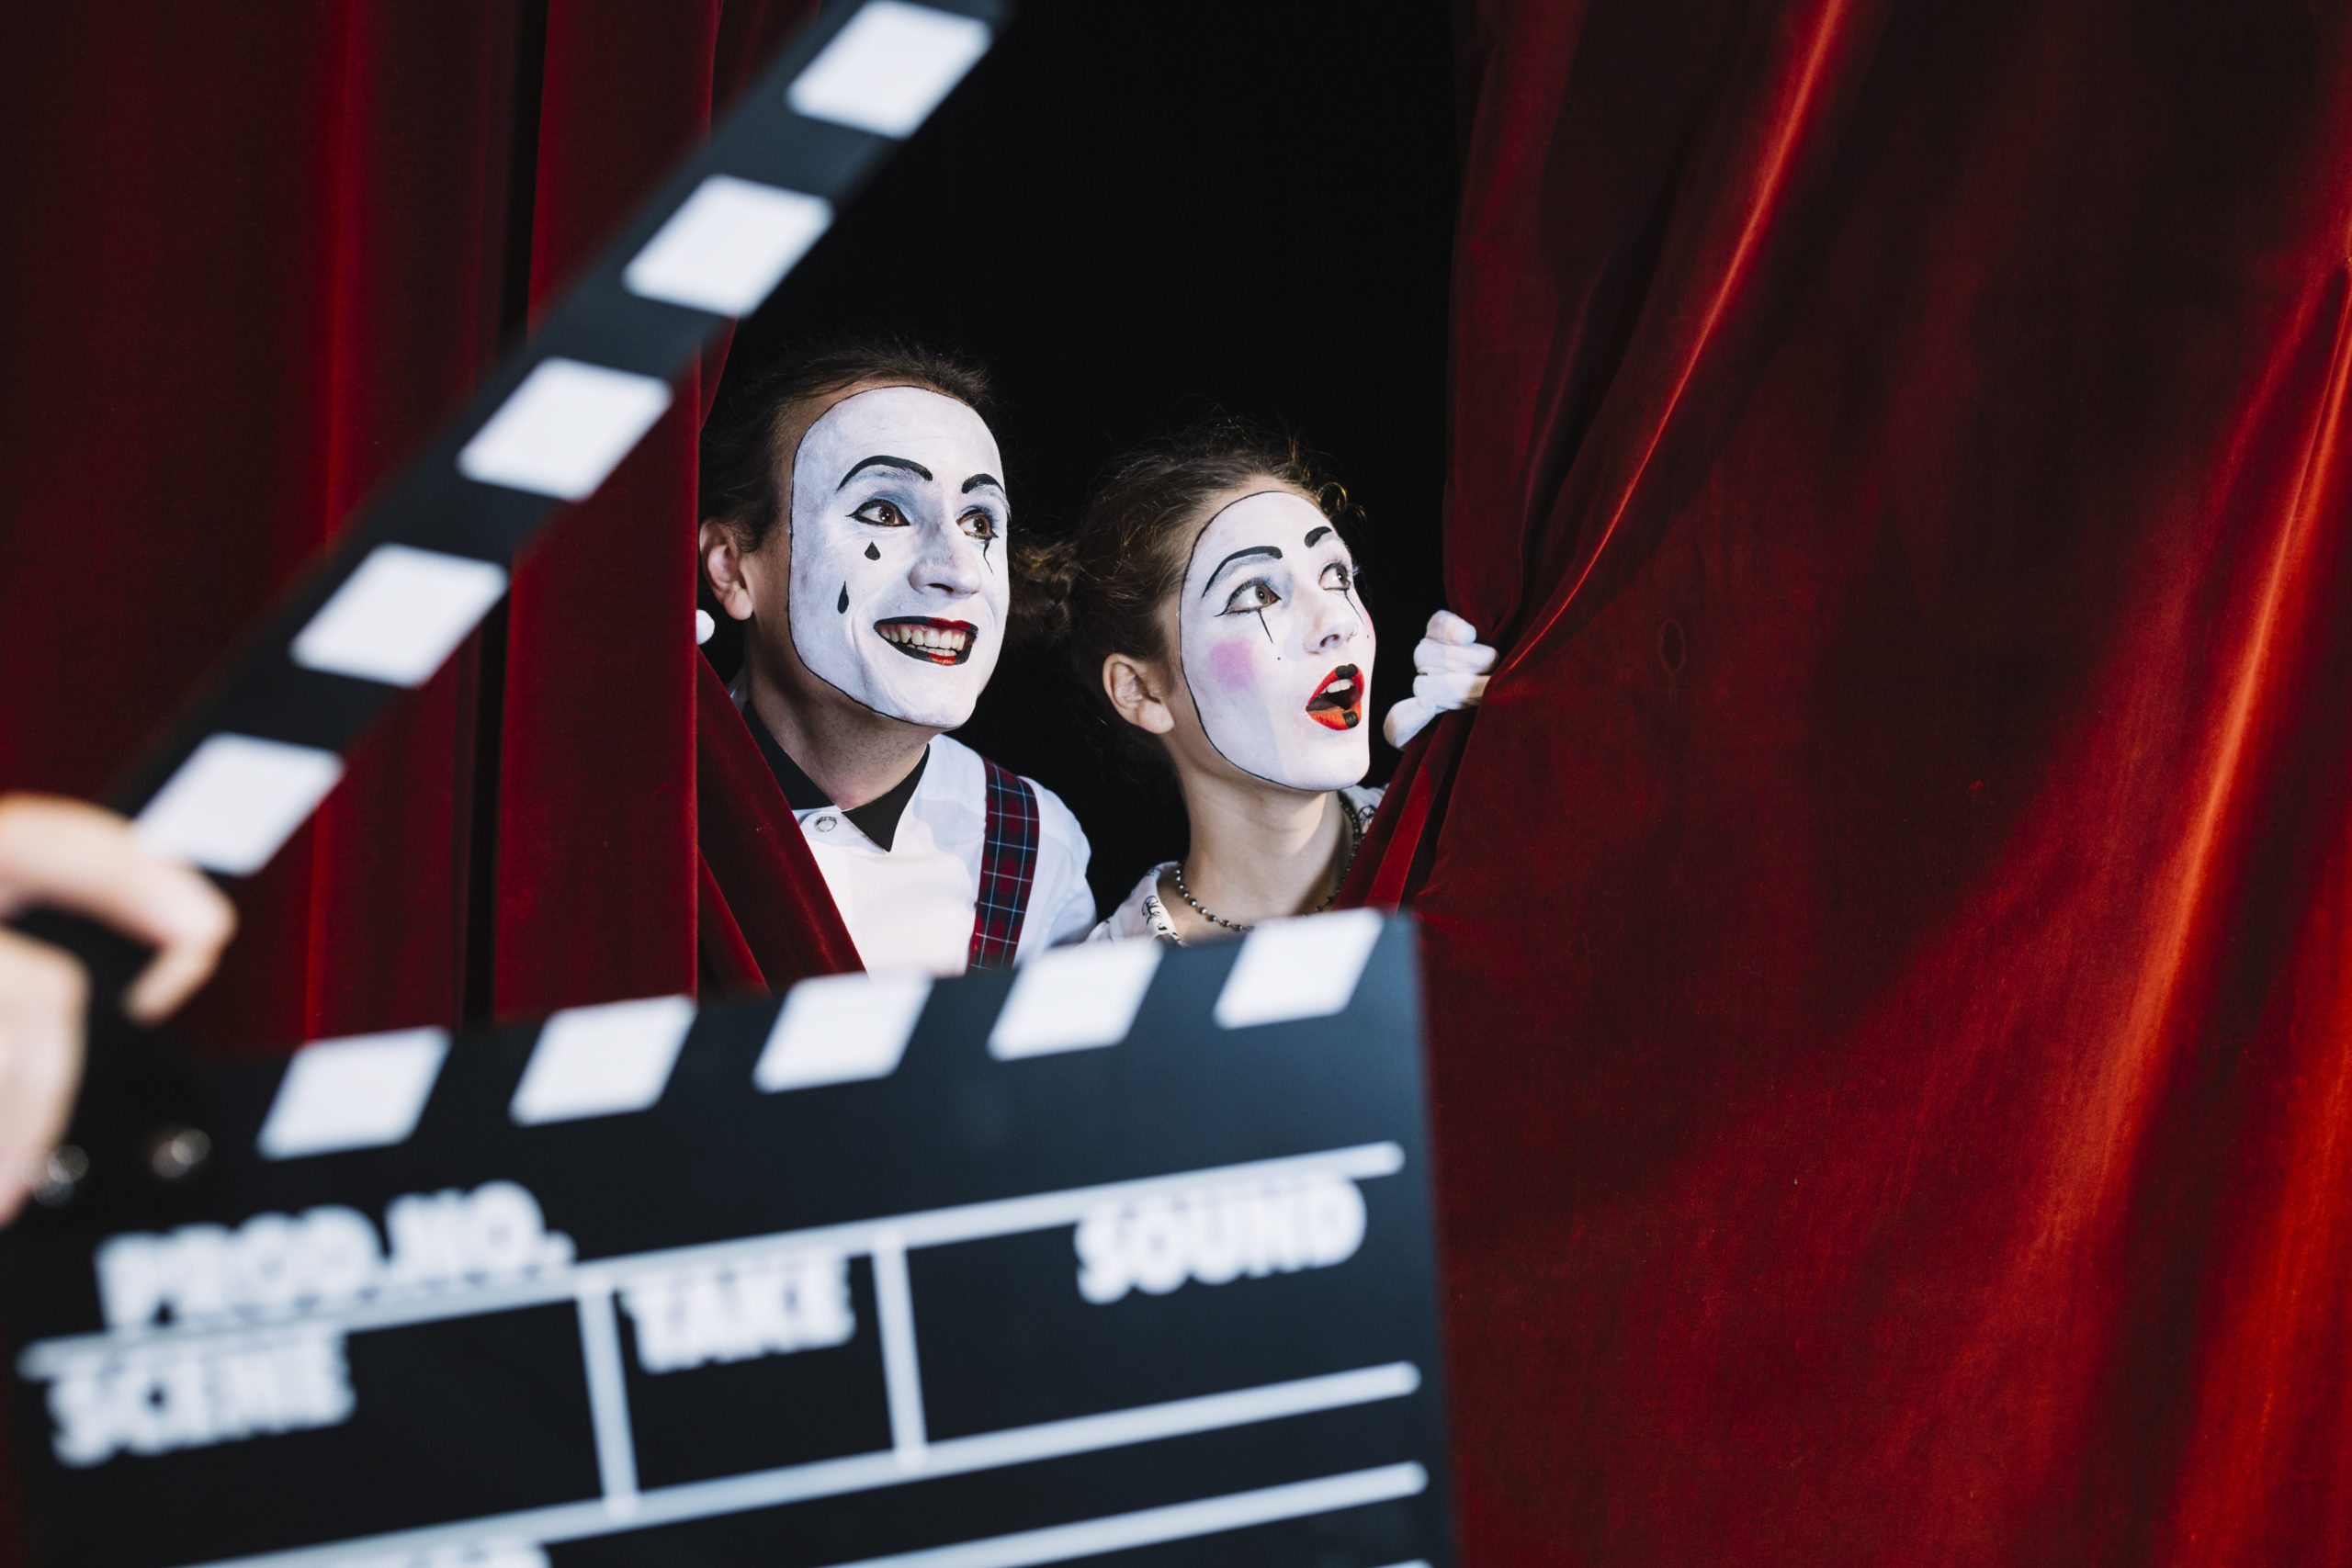 Clapperboard In Front Of Excited Mime Couple Peeking Behind The Red Curtain